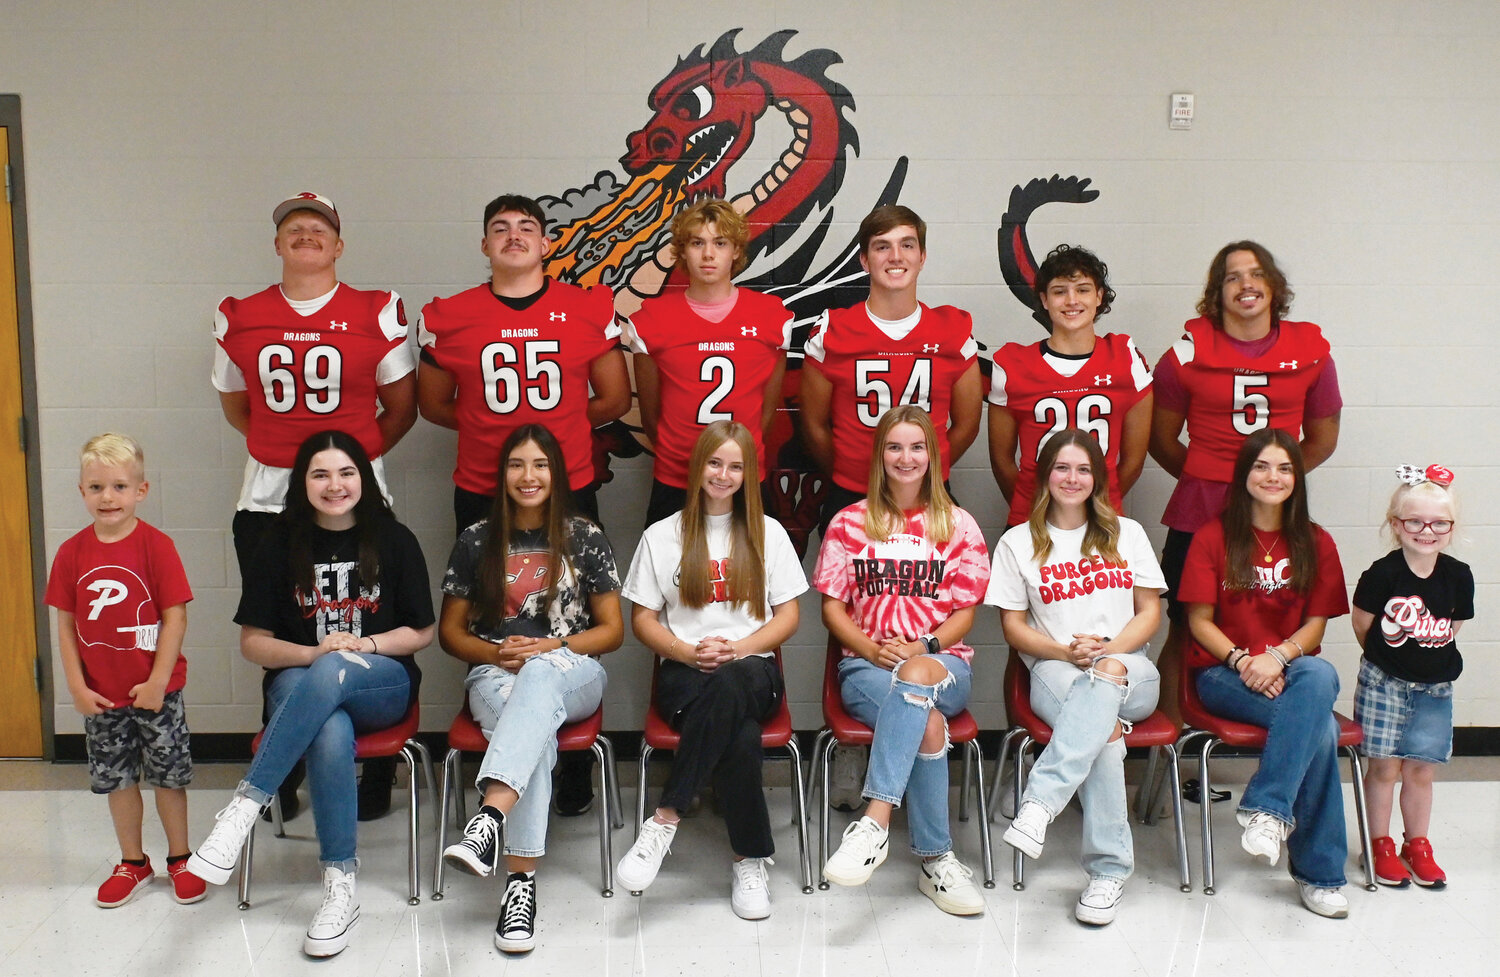 The Purcell High School Homecoming court includes, from front left, crown bearer Olin Sweeney, Halle Madden, Kaylin Vazquez, Gracie Pruitt, Katy Keith, Avery McWhirter, Payton Lawson and flower girl Laiklynn Harper. On the back row, from left, are Brody Holder, Derek Cravens, Noah Mason, Carter Goldston, Jett Tyler and Ryker Fink. Coronation is set for Friday night at 6:30 p.m.